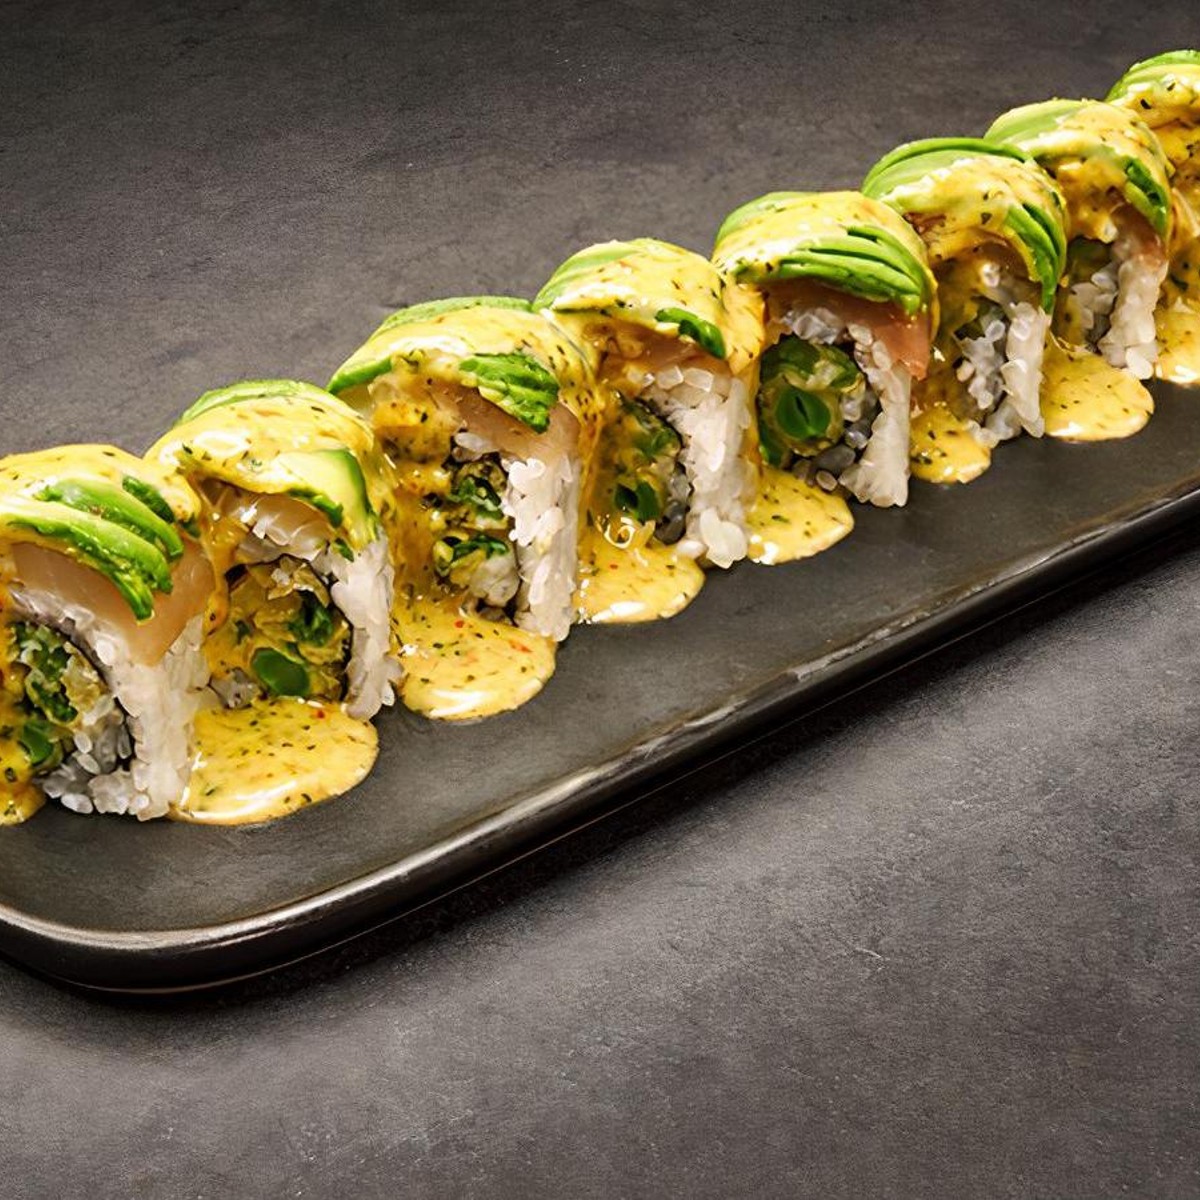 The Green Machine: Bamboo Sushi's No. 1 Roll Comes to Denver